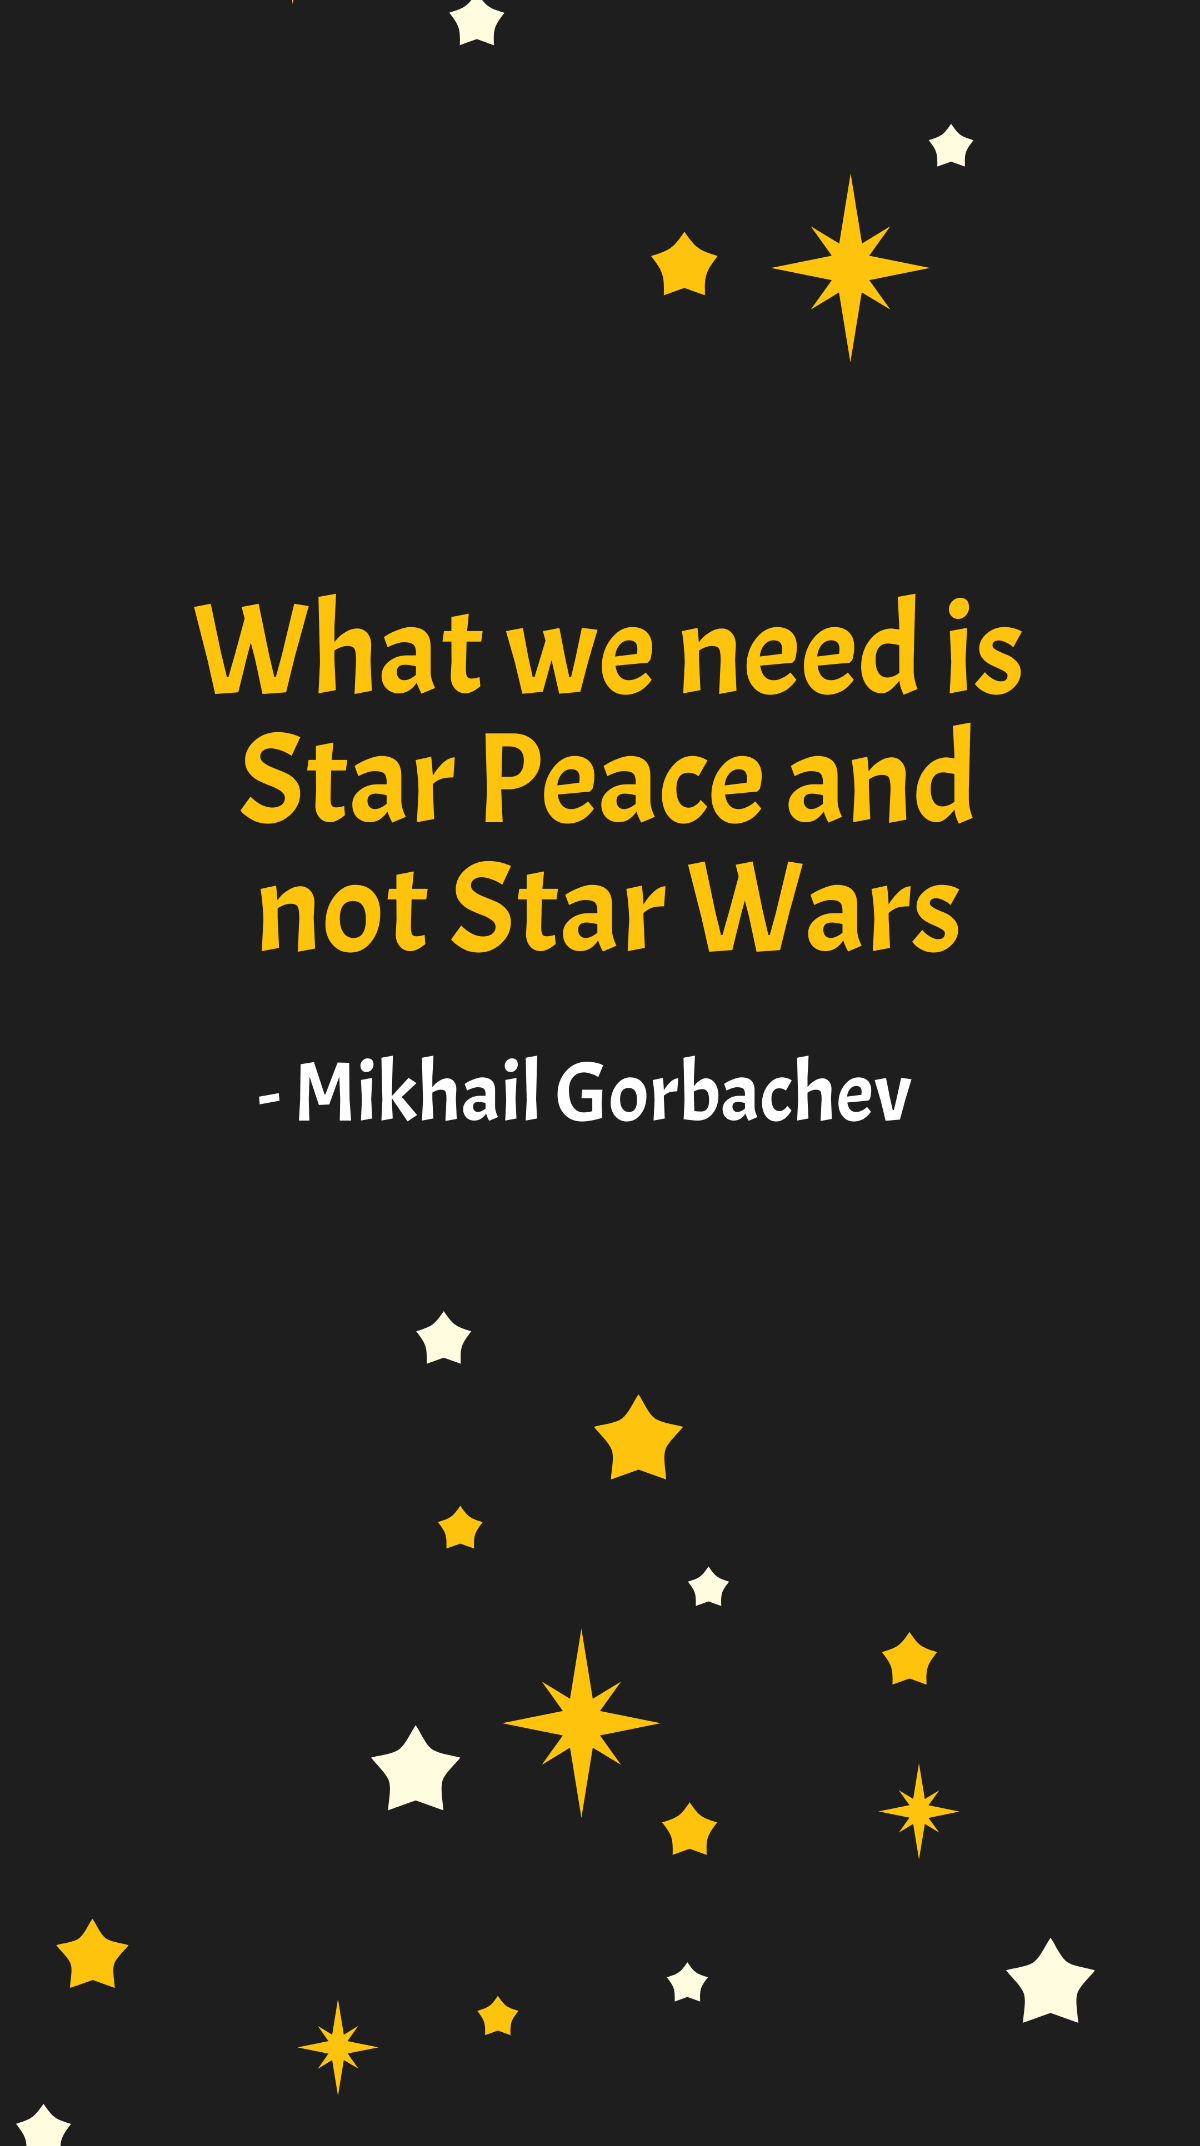 Free Mikhail Gorbachev - What we need is Star Peace and not Star Wars Template